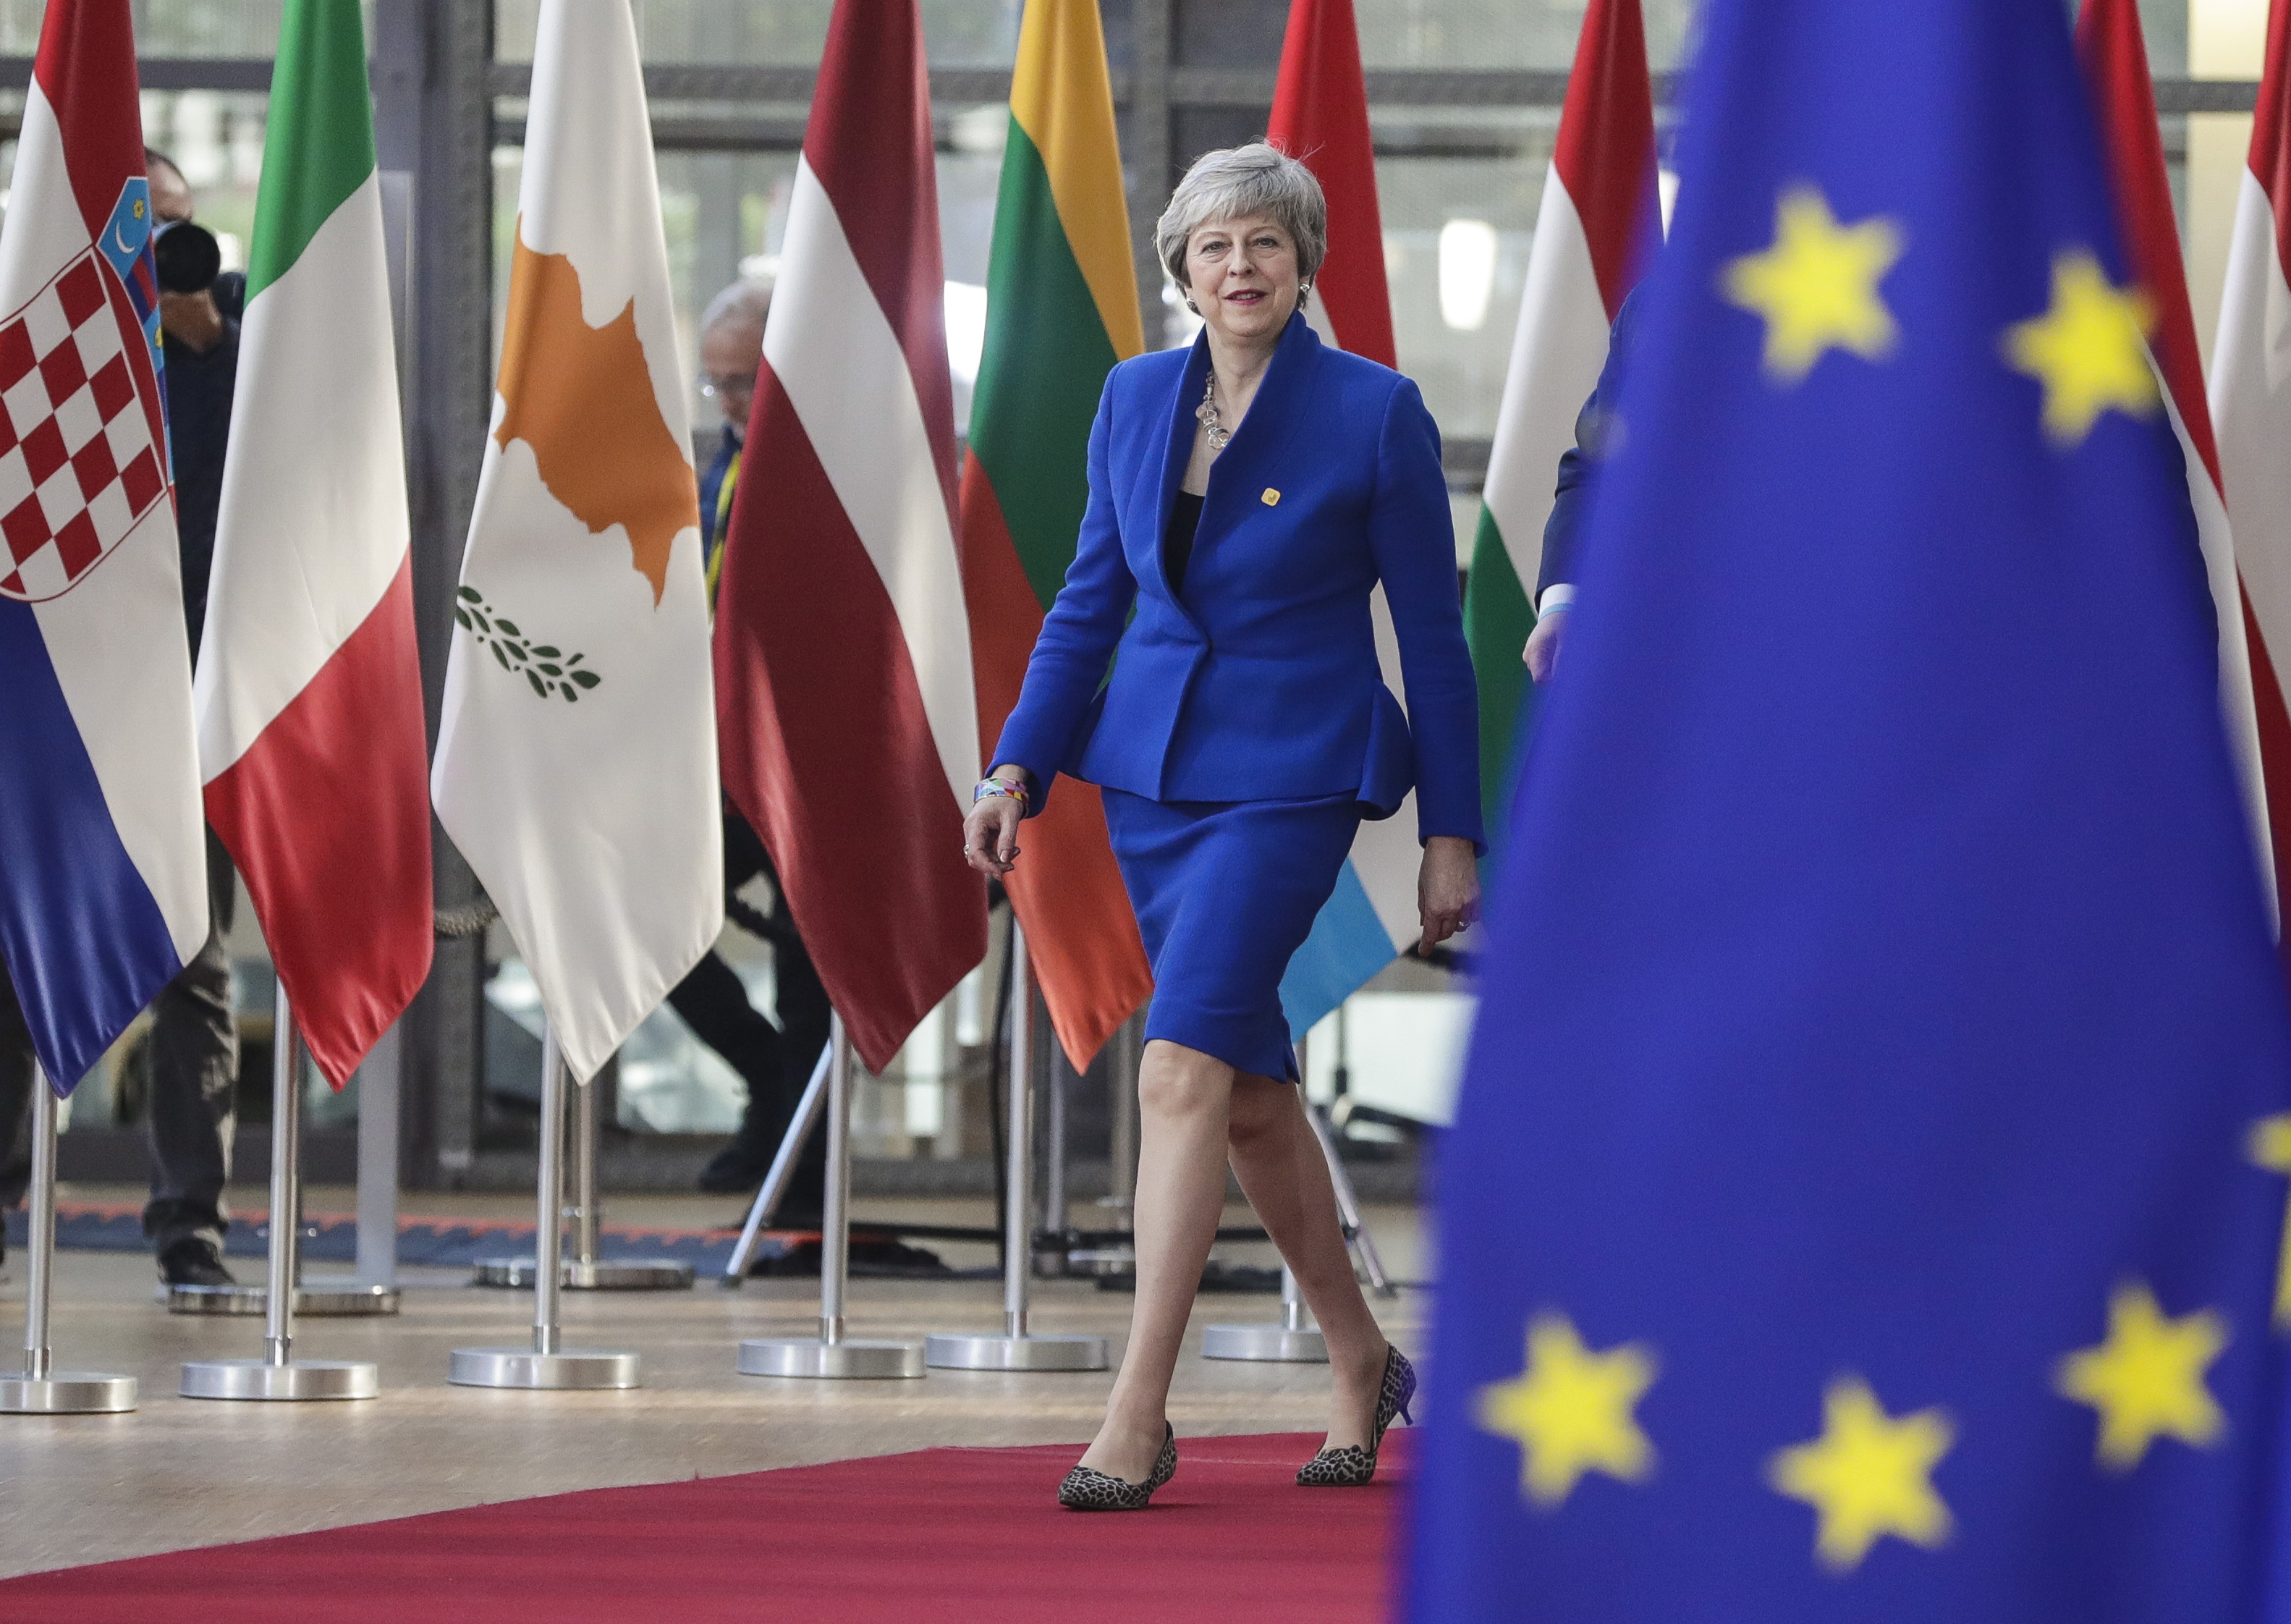 epa07496566 British Prime Minister Theresa May arrives for a special EU summit on Brexit at the European Council in Brussels, Belgium, 10 April 2019. EU leaders gathered for an emergency summit in Brussels to discuss a new Brexit extension.  EPA/STEPHANIE LECOCQ